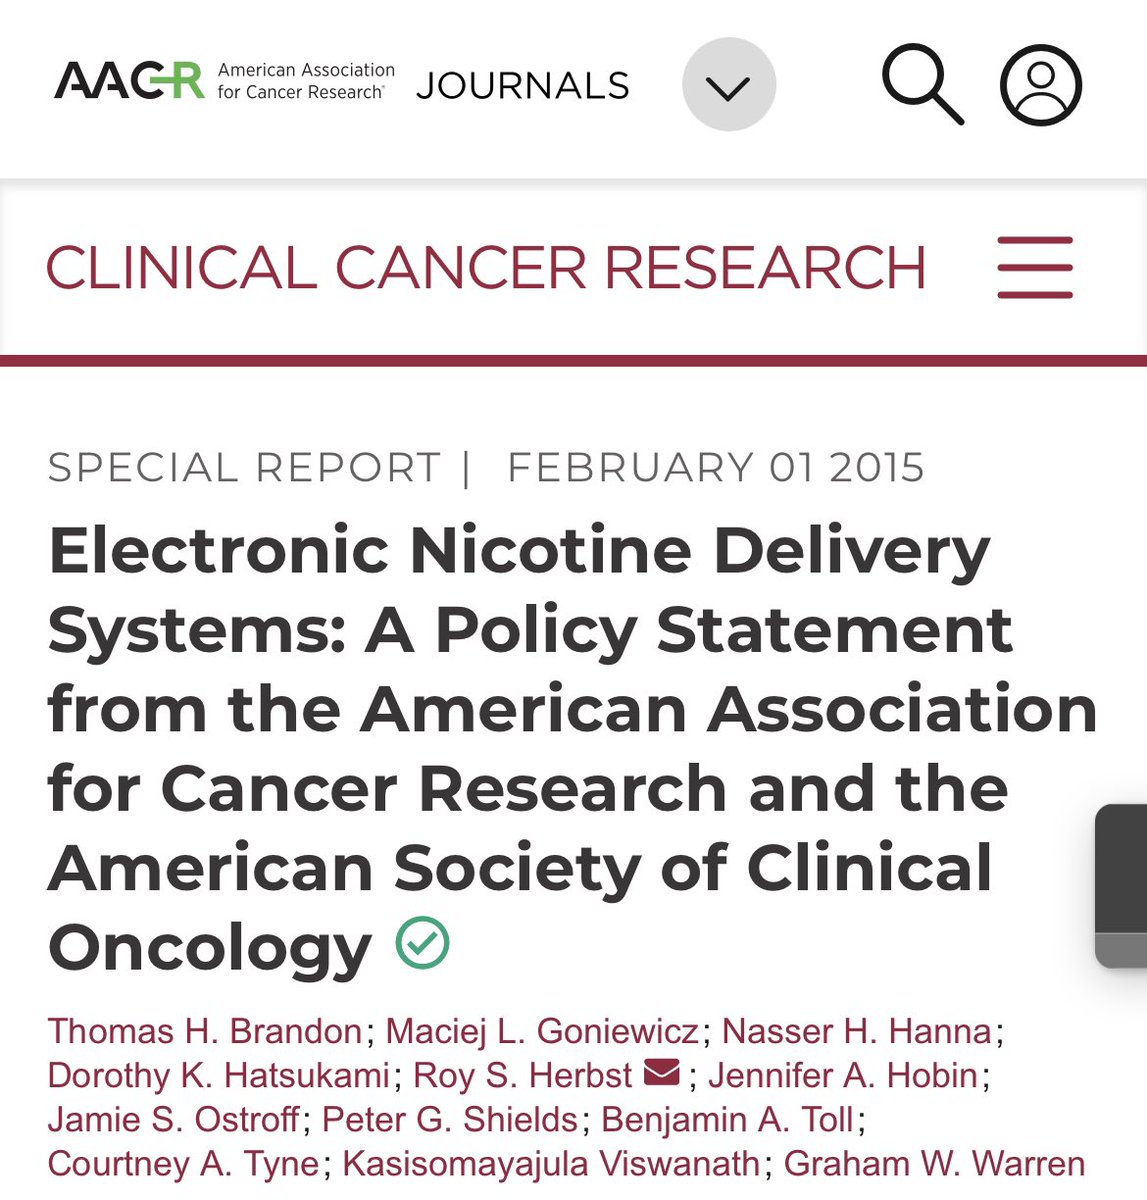 🔥🚨Hot off the press @JCO_ASCO & @CCR_AACR; Joint policy statement by @ASCO & @AACR on Electronic #Nicotine Delivery Systems, outlining latest research in this area & recommendations for regulating these products to protect #PublicHealth. @OncoAlert 👇🏼 ascopubs.org/doi/full/10.12…